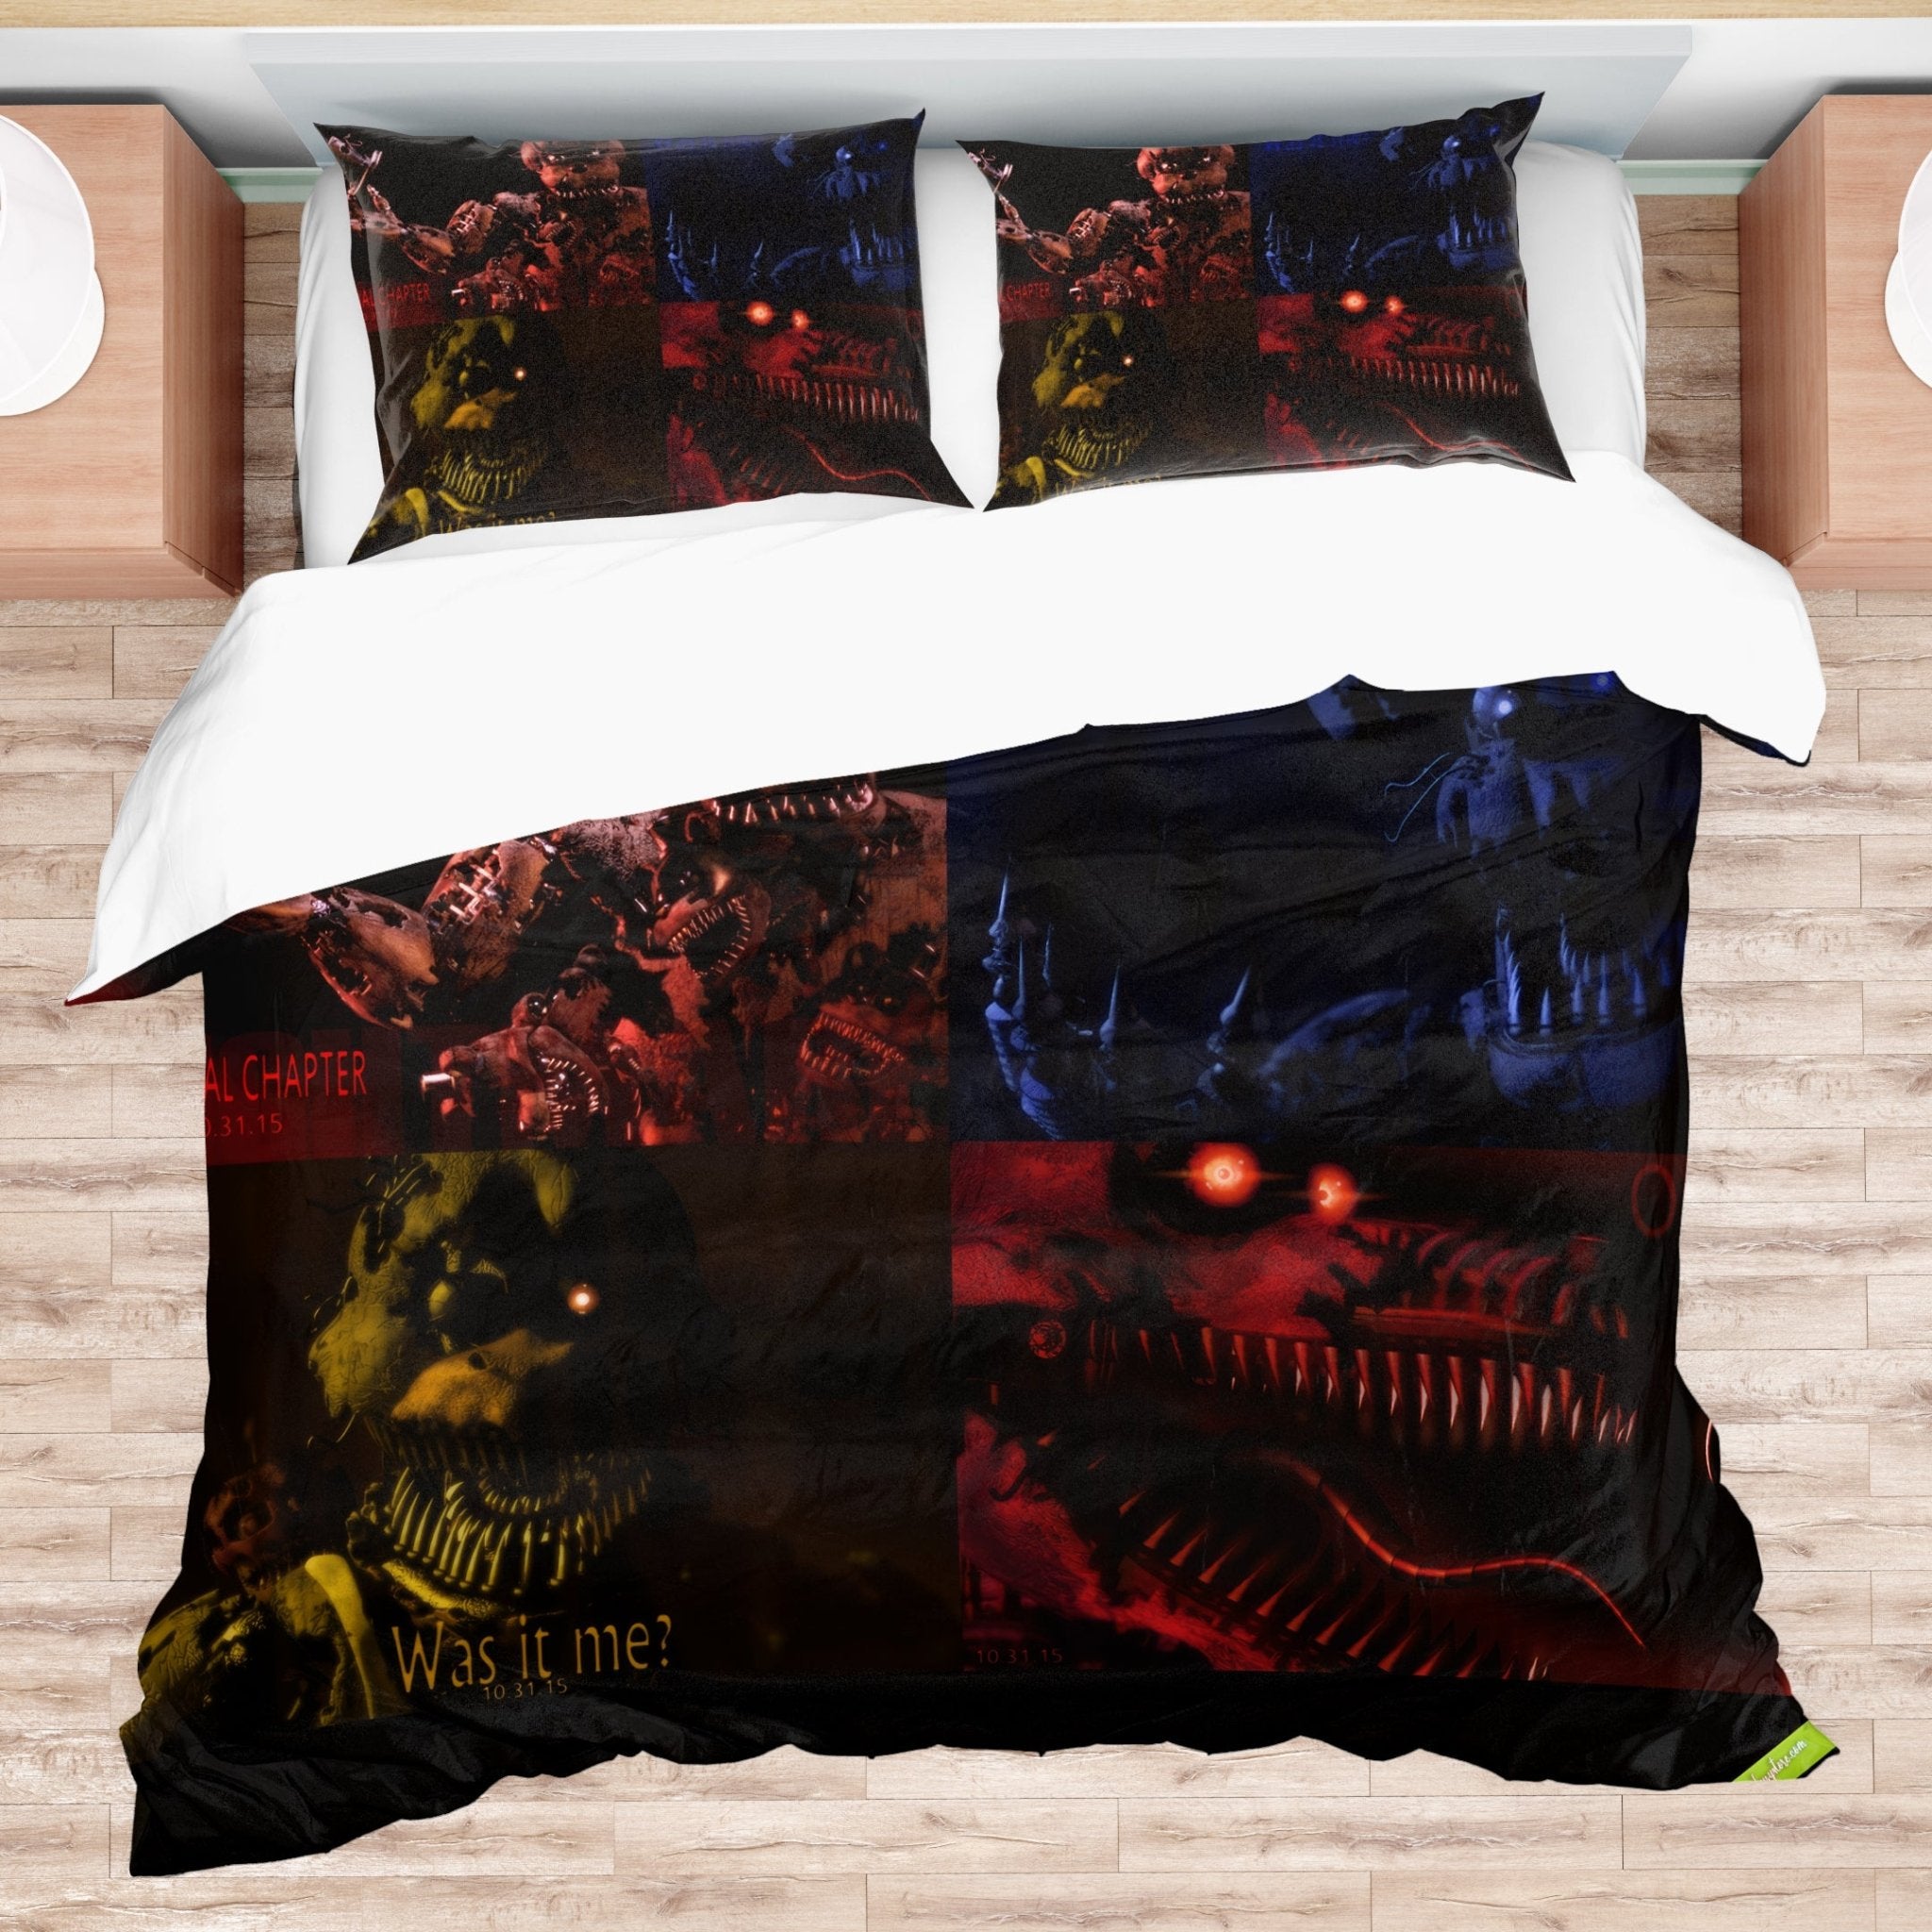 How to train your dragon 3D Bedding Sets